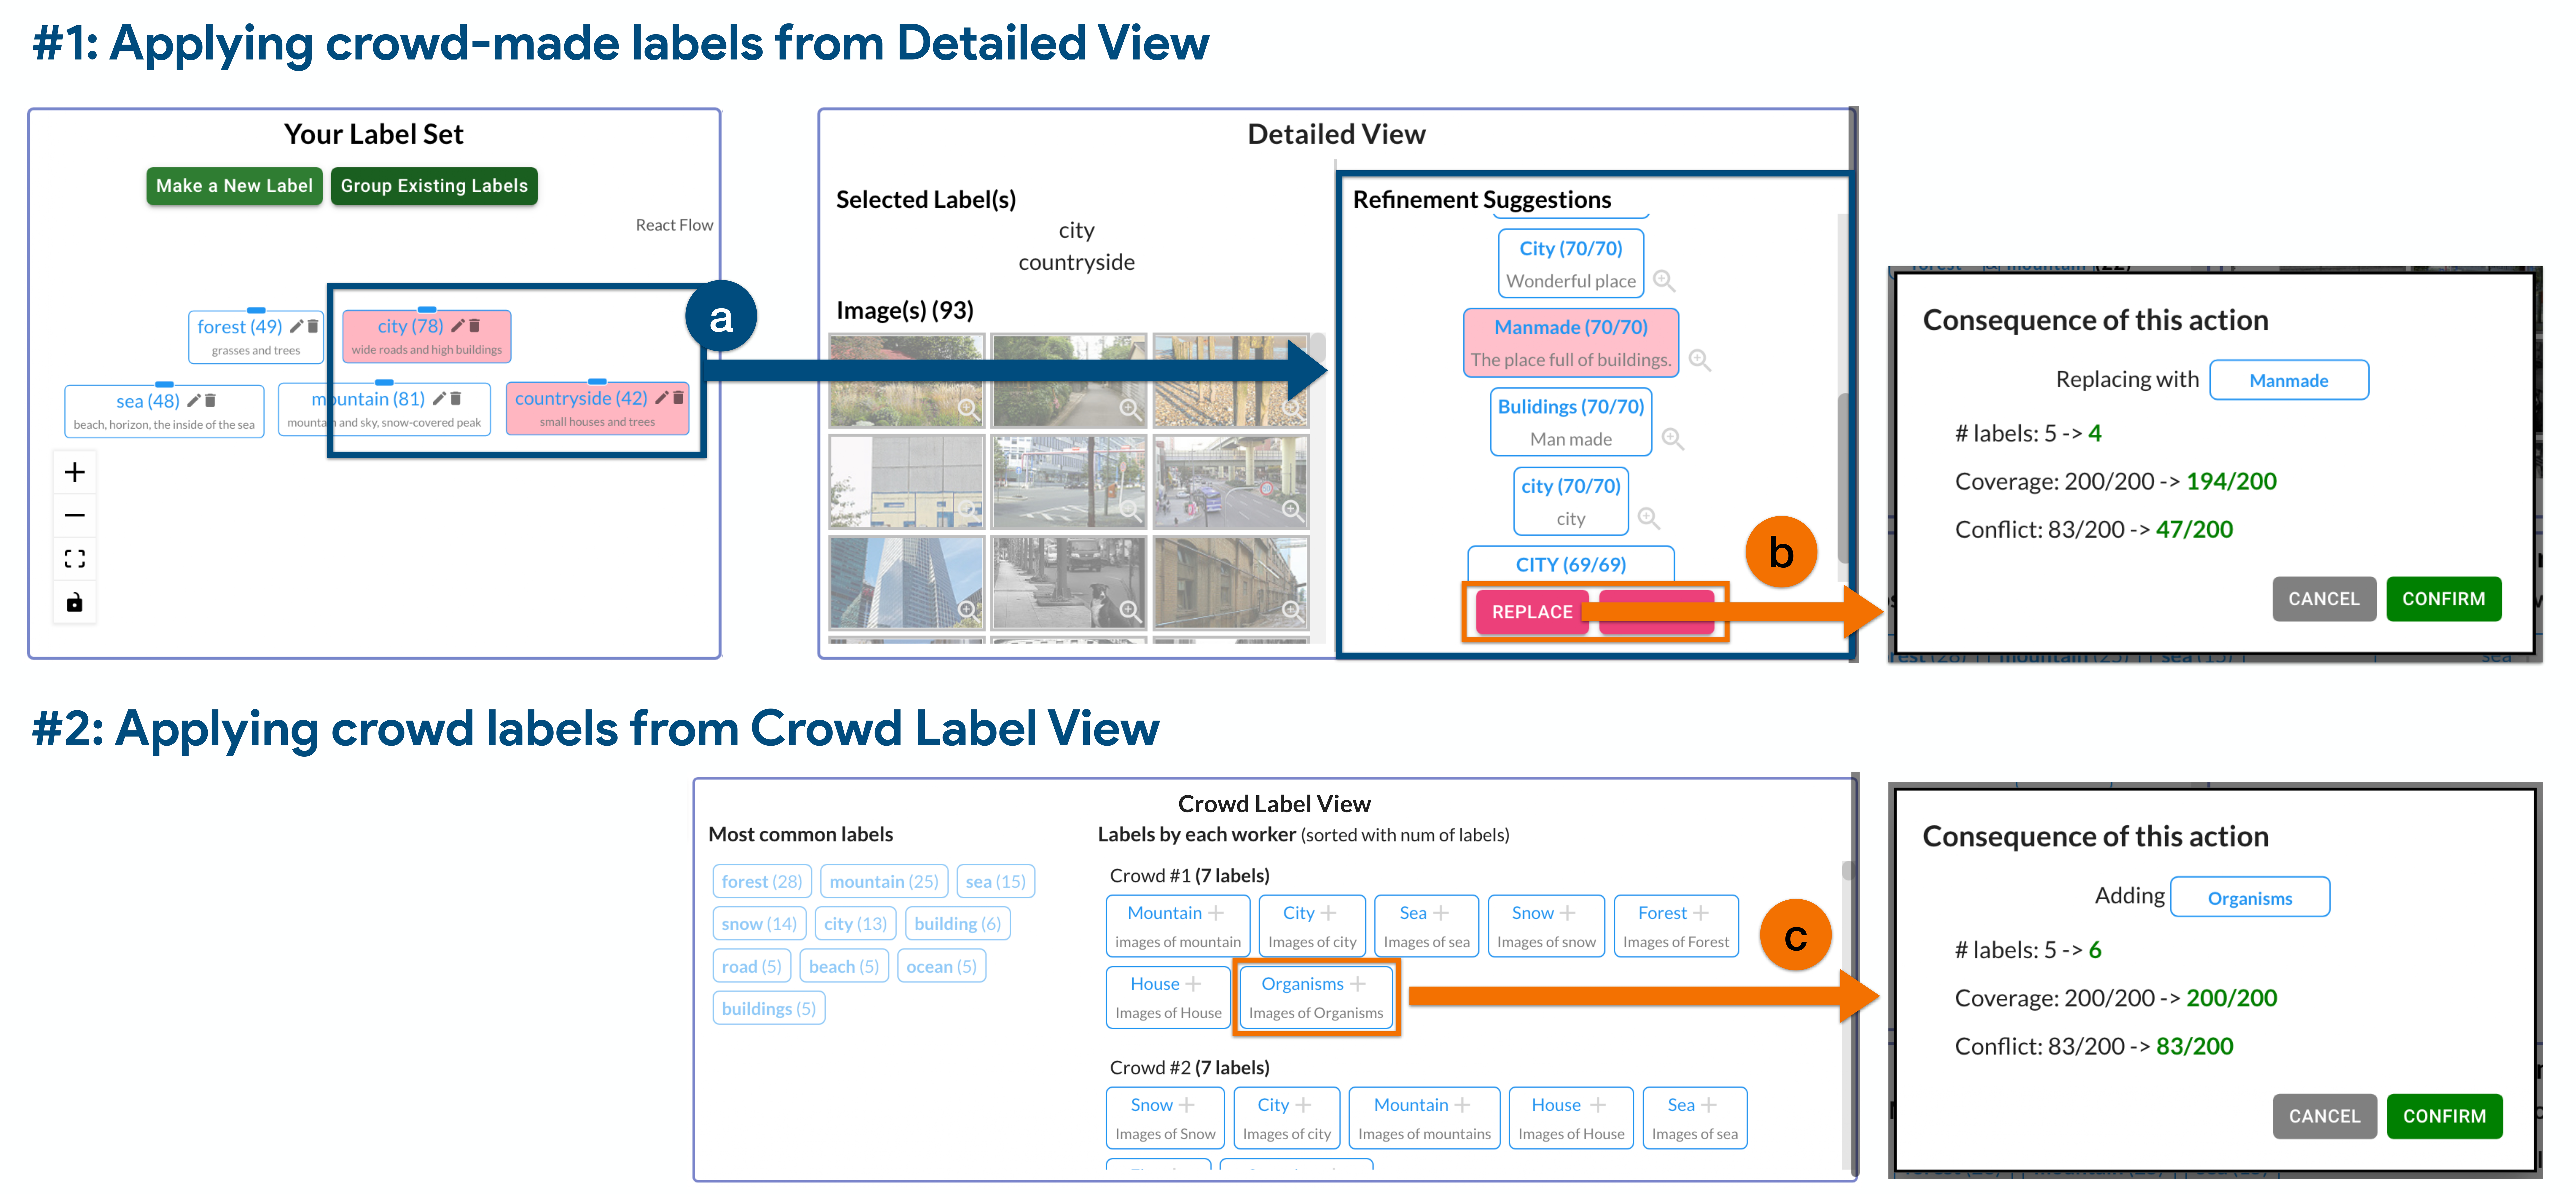 Illustrating two ways to apply crowd-made labels to the current label set